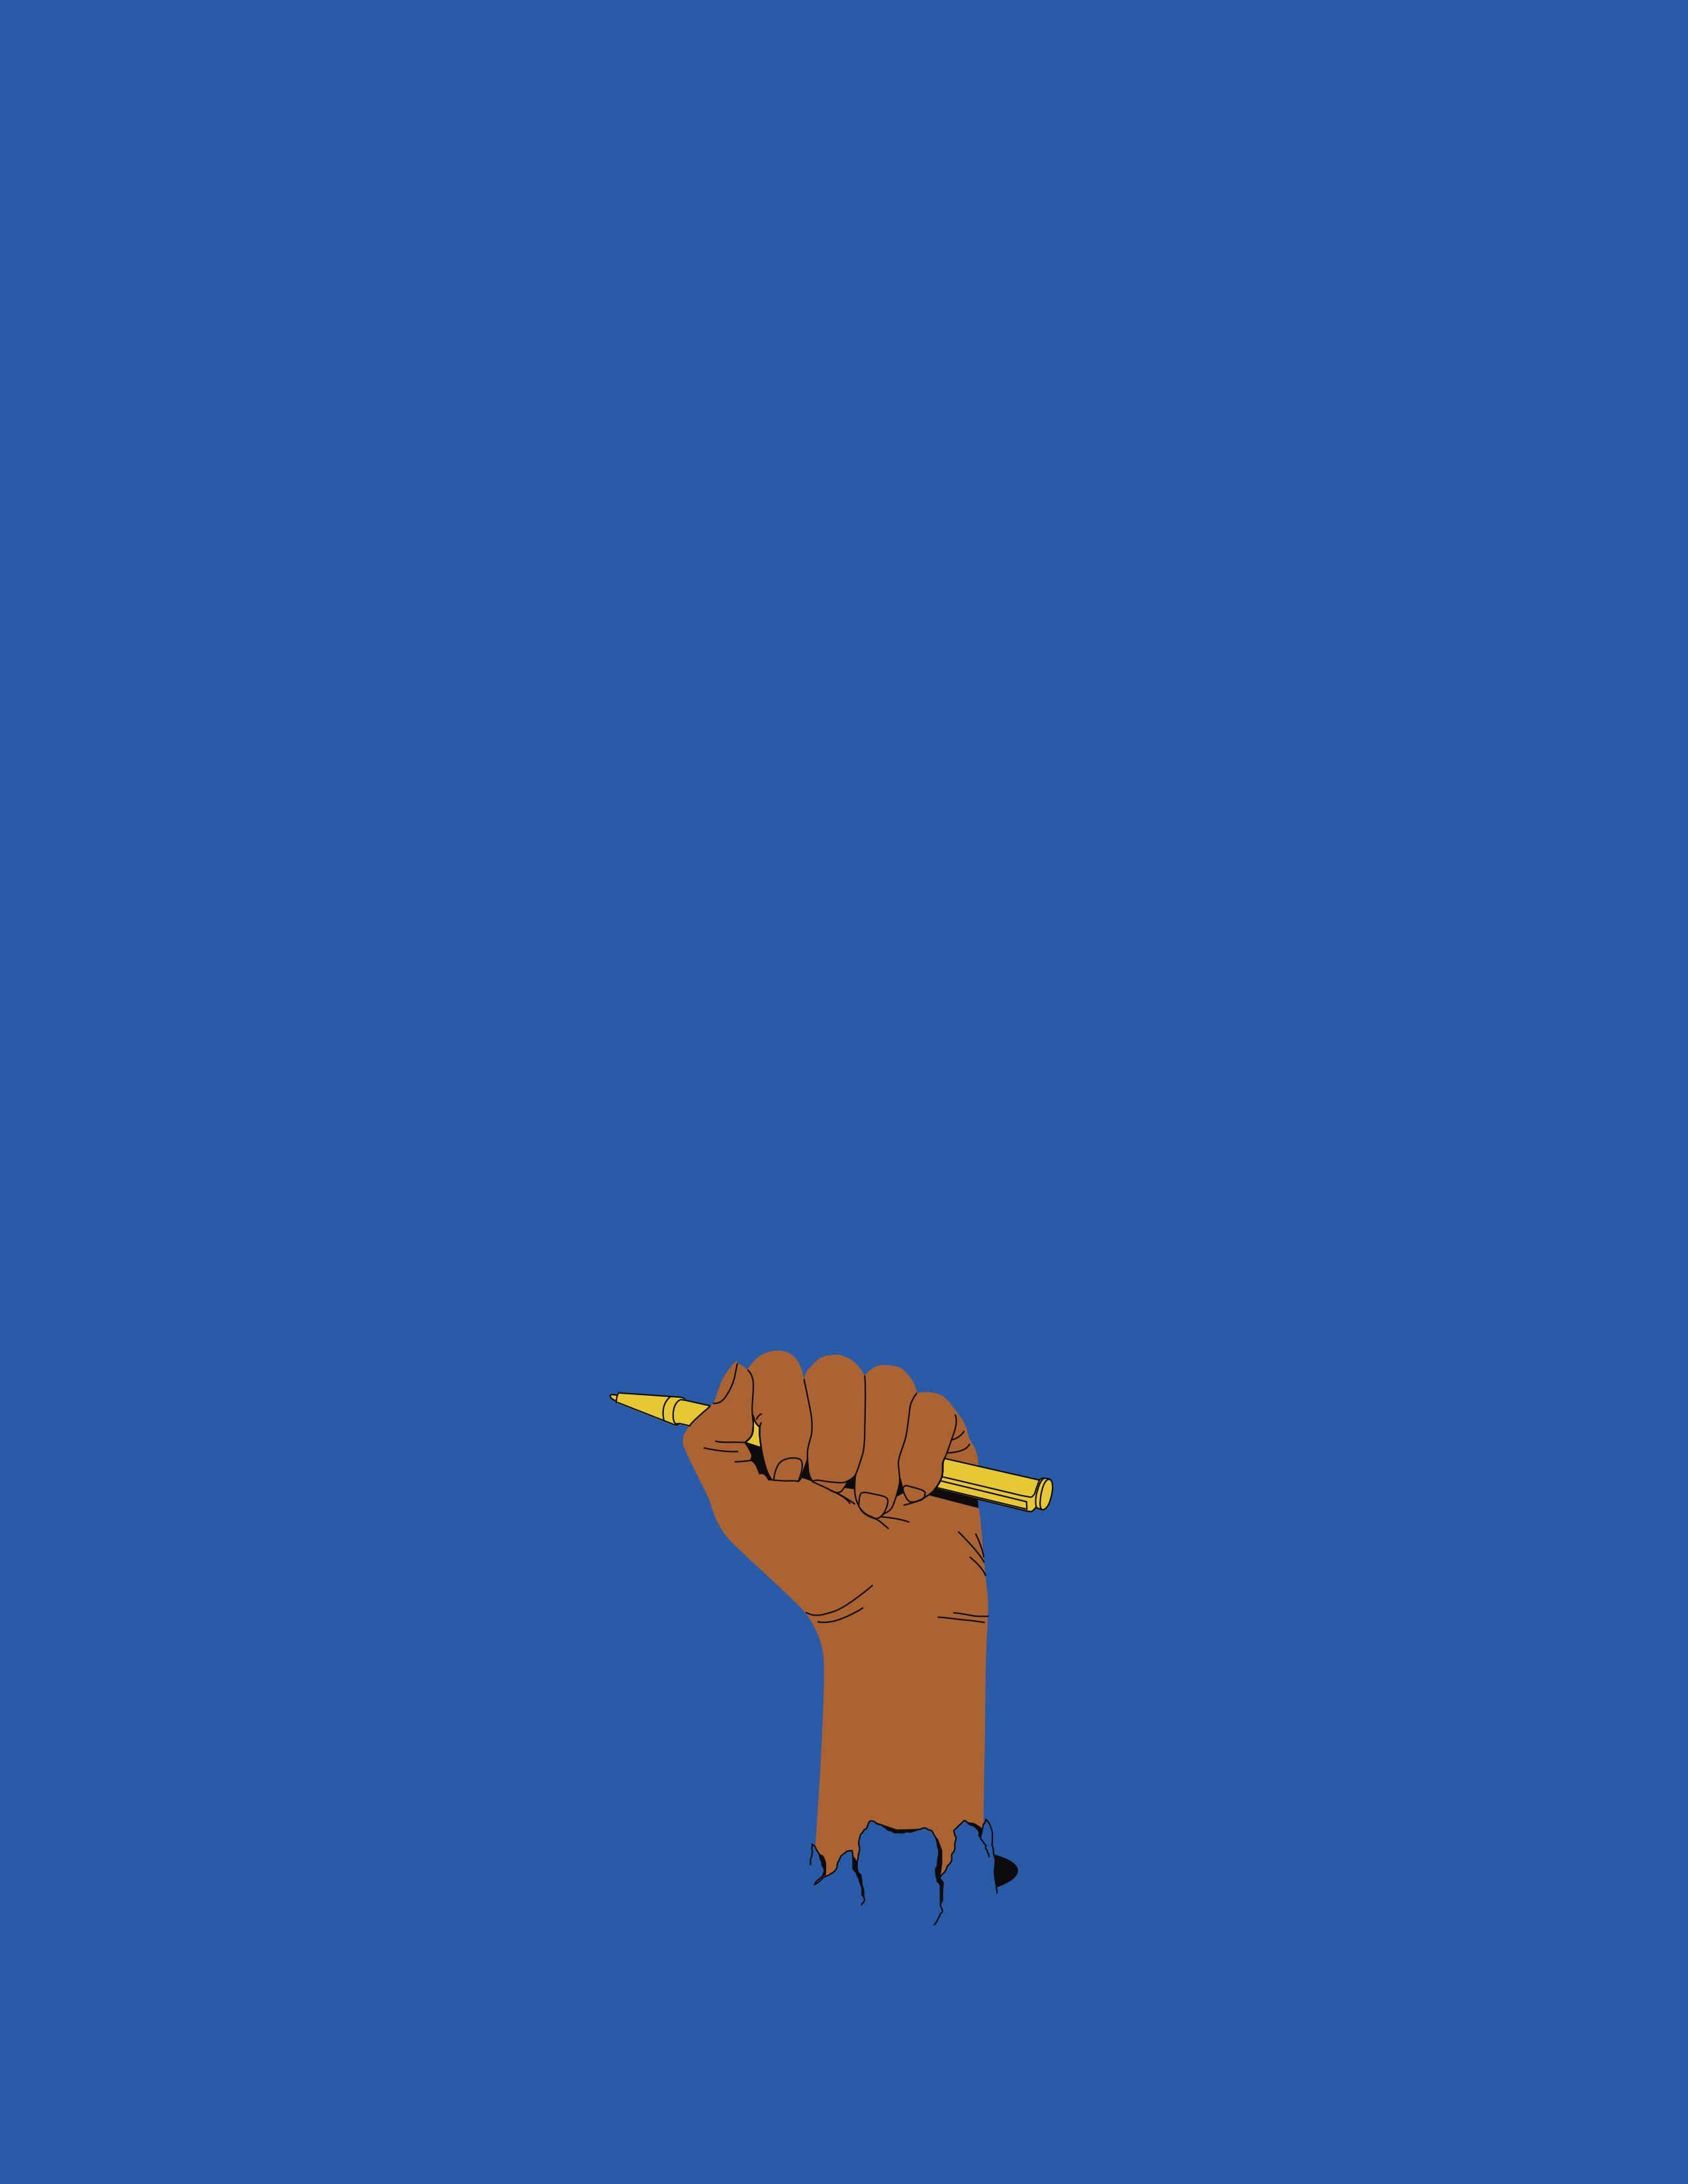 illustration of a brown hand holding a pencil and breaking through paper